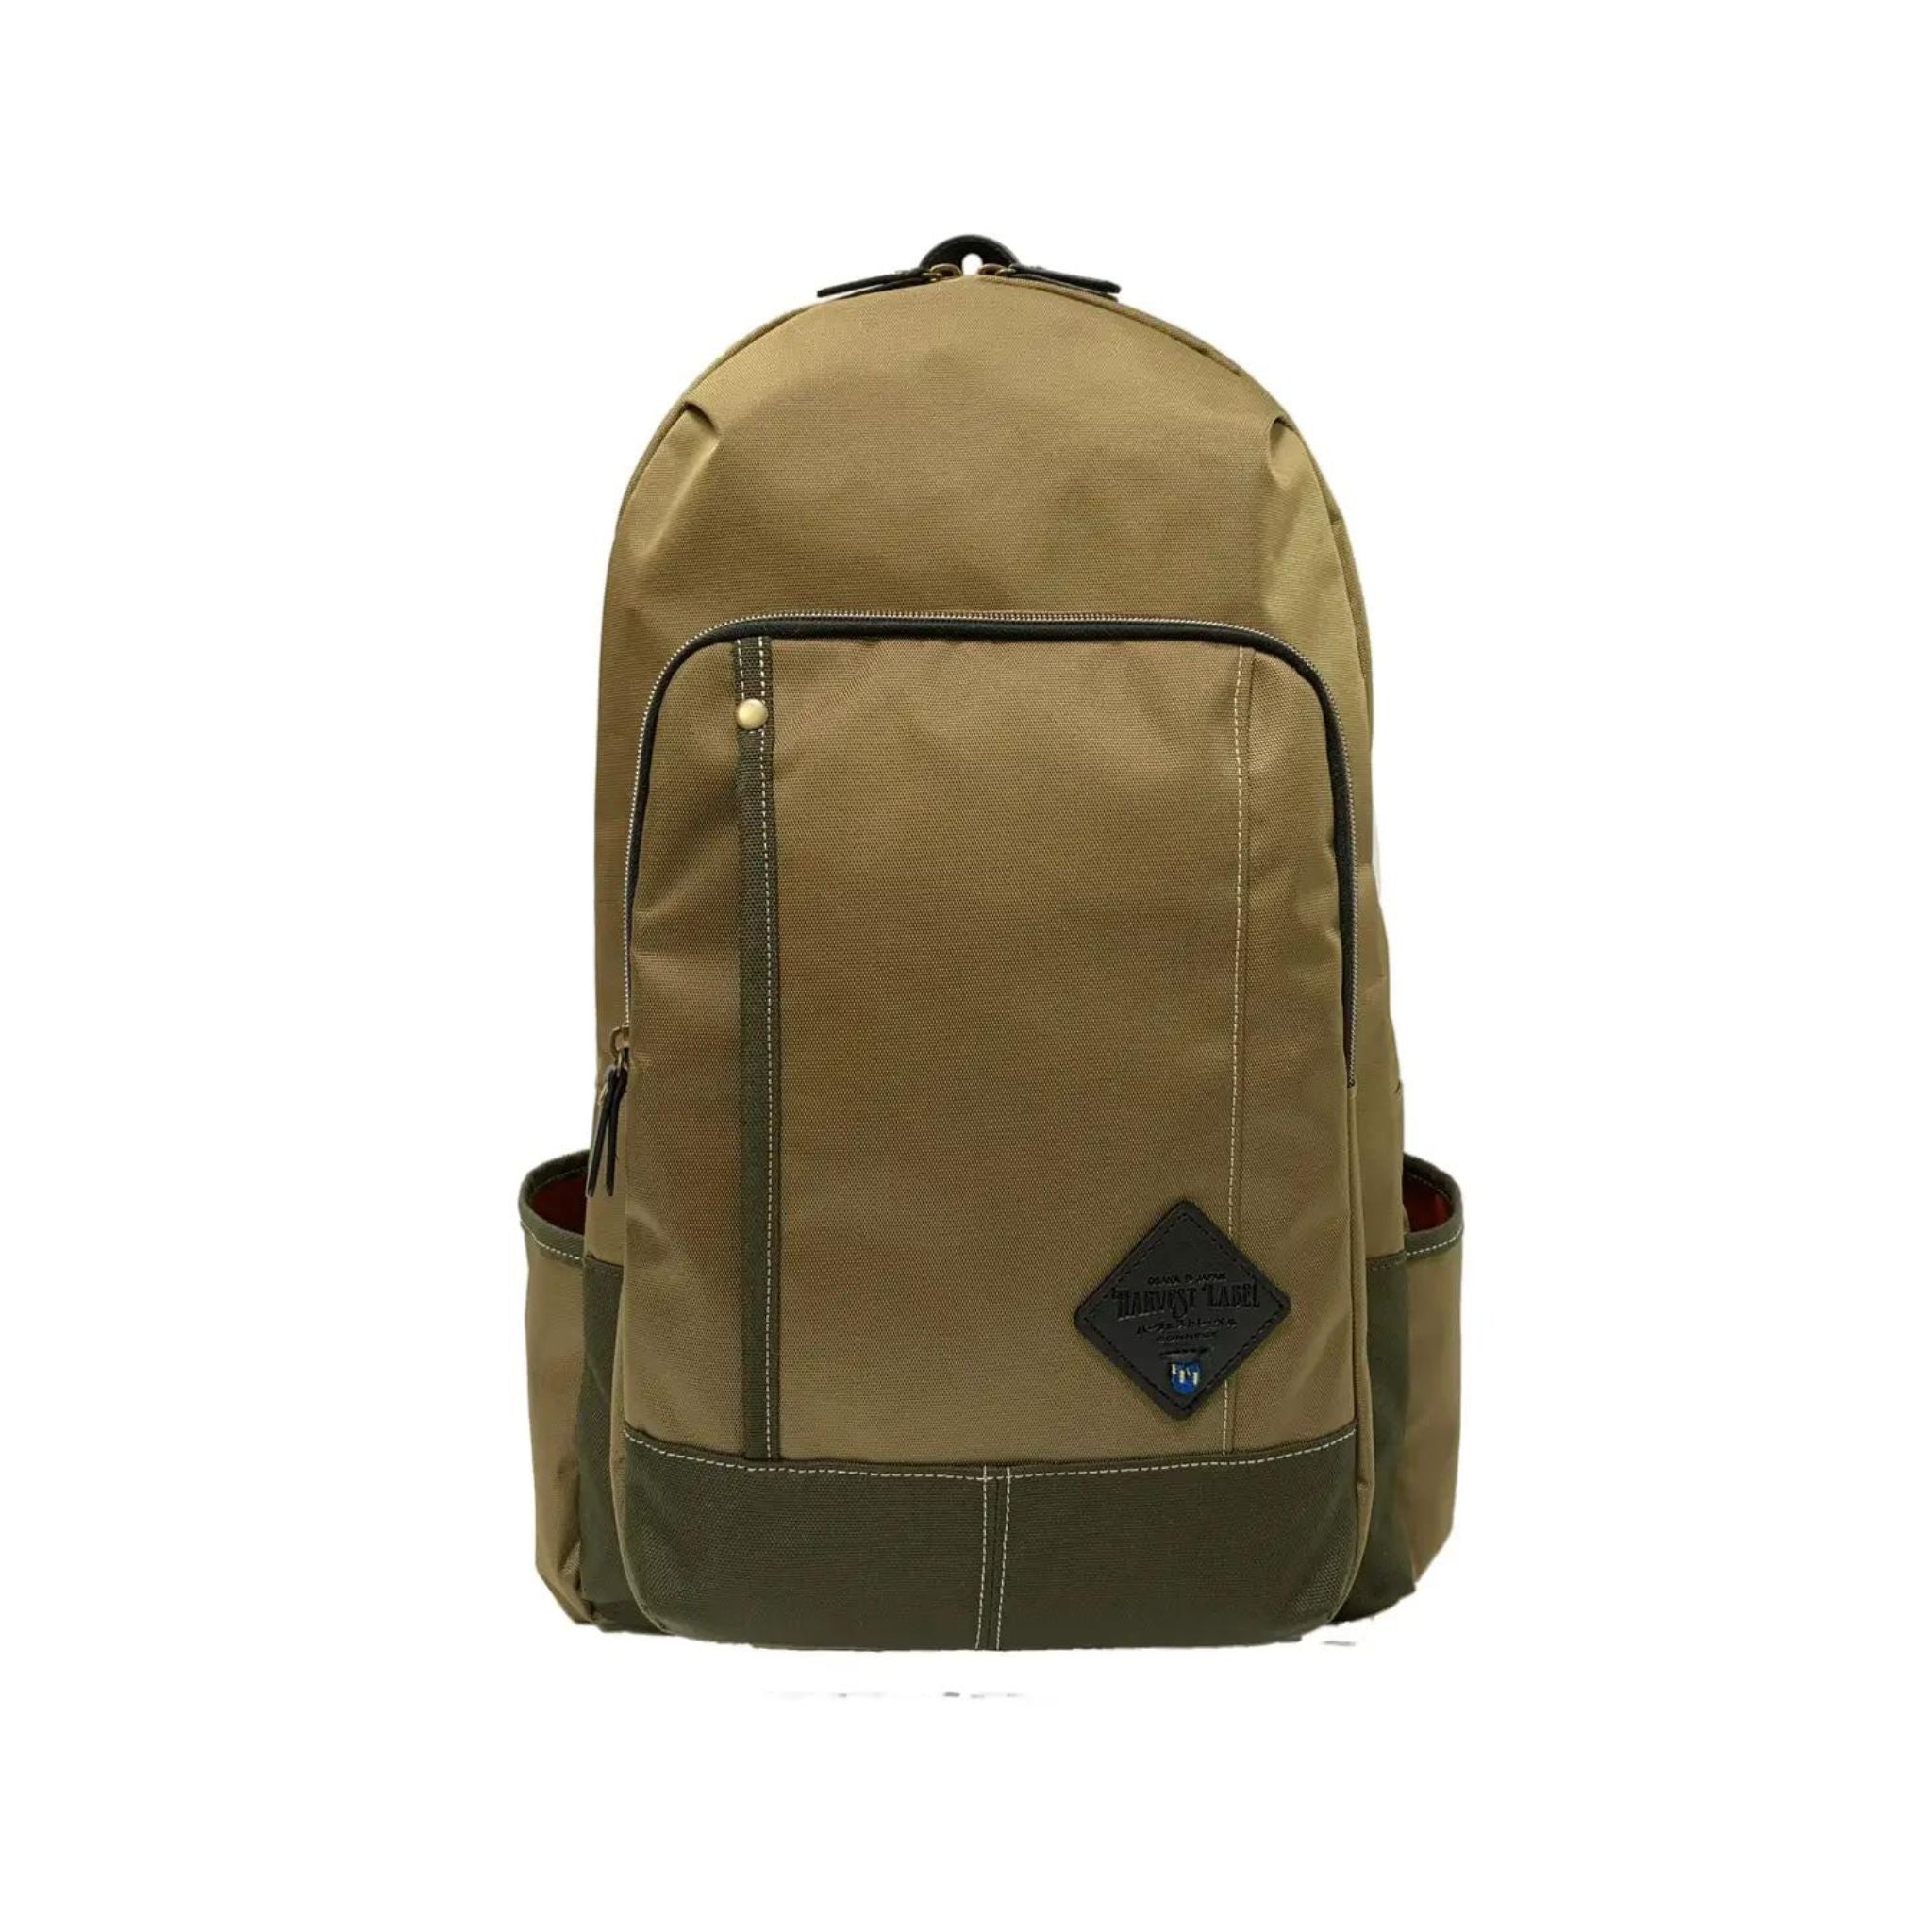 Alpha Backpack - Valley Variety